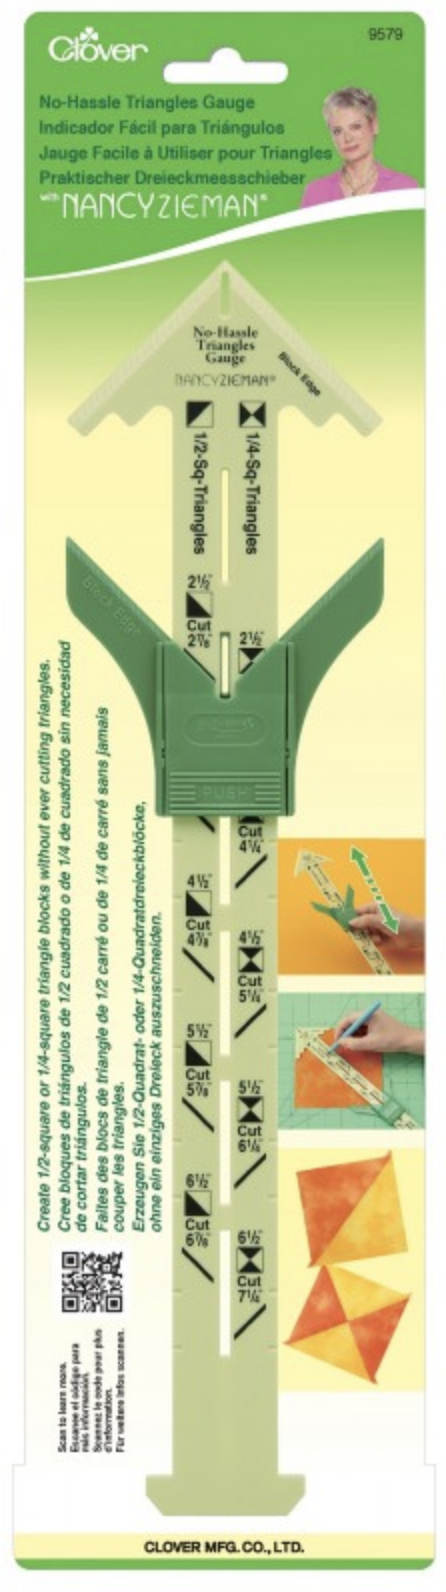 Clover's No-Hassle Triangle Gauge available at Nancy Zieman Productions at ShopNZP.com